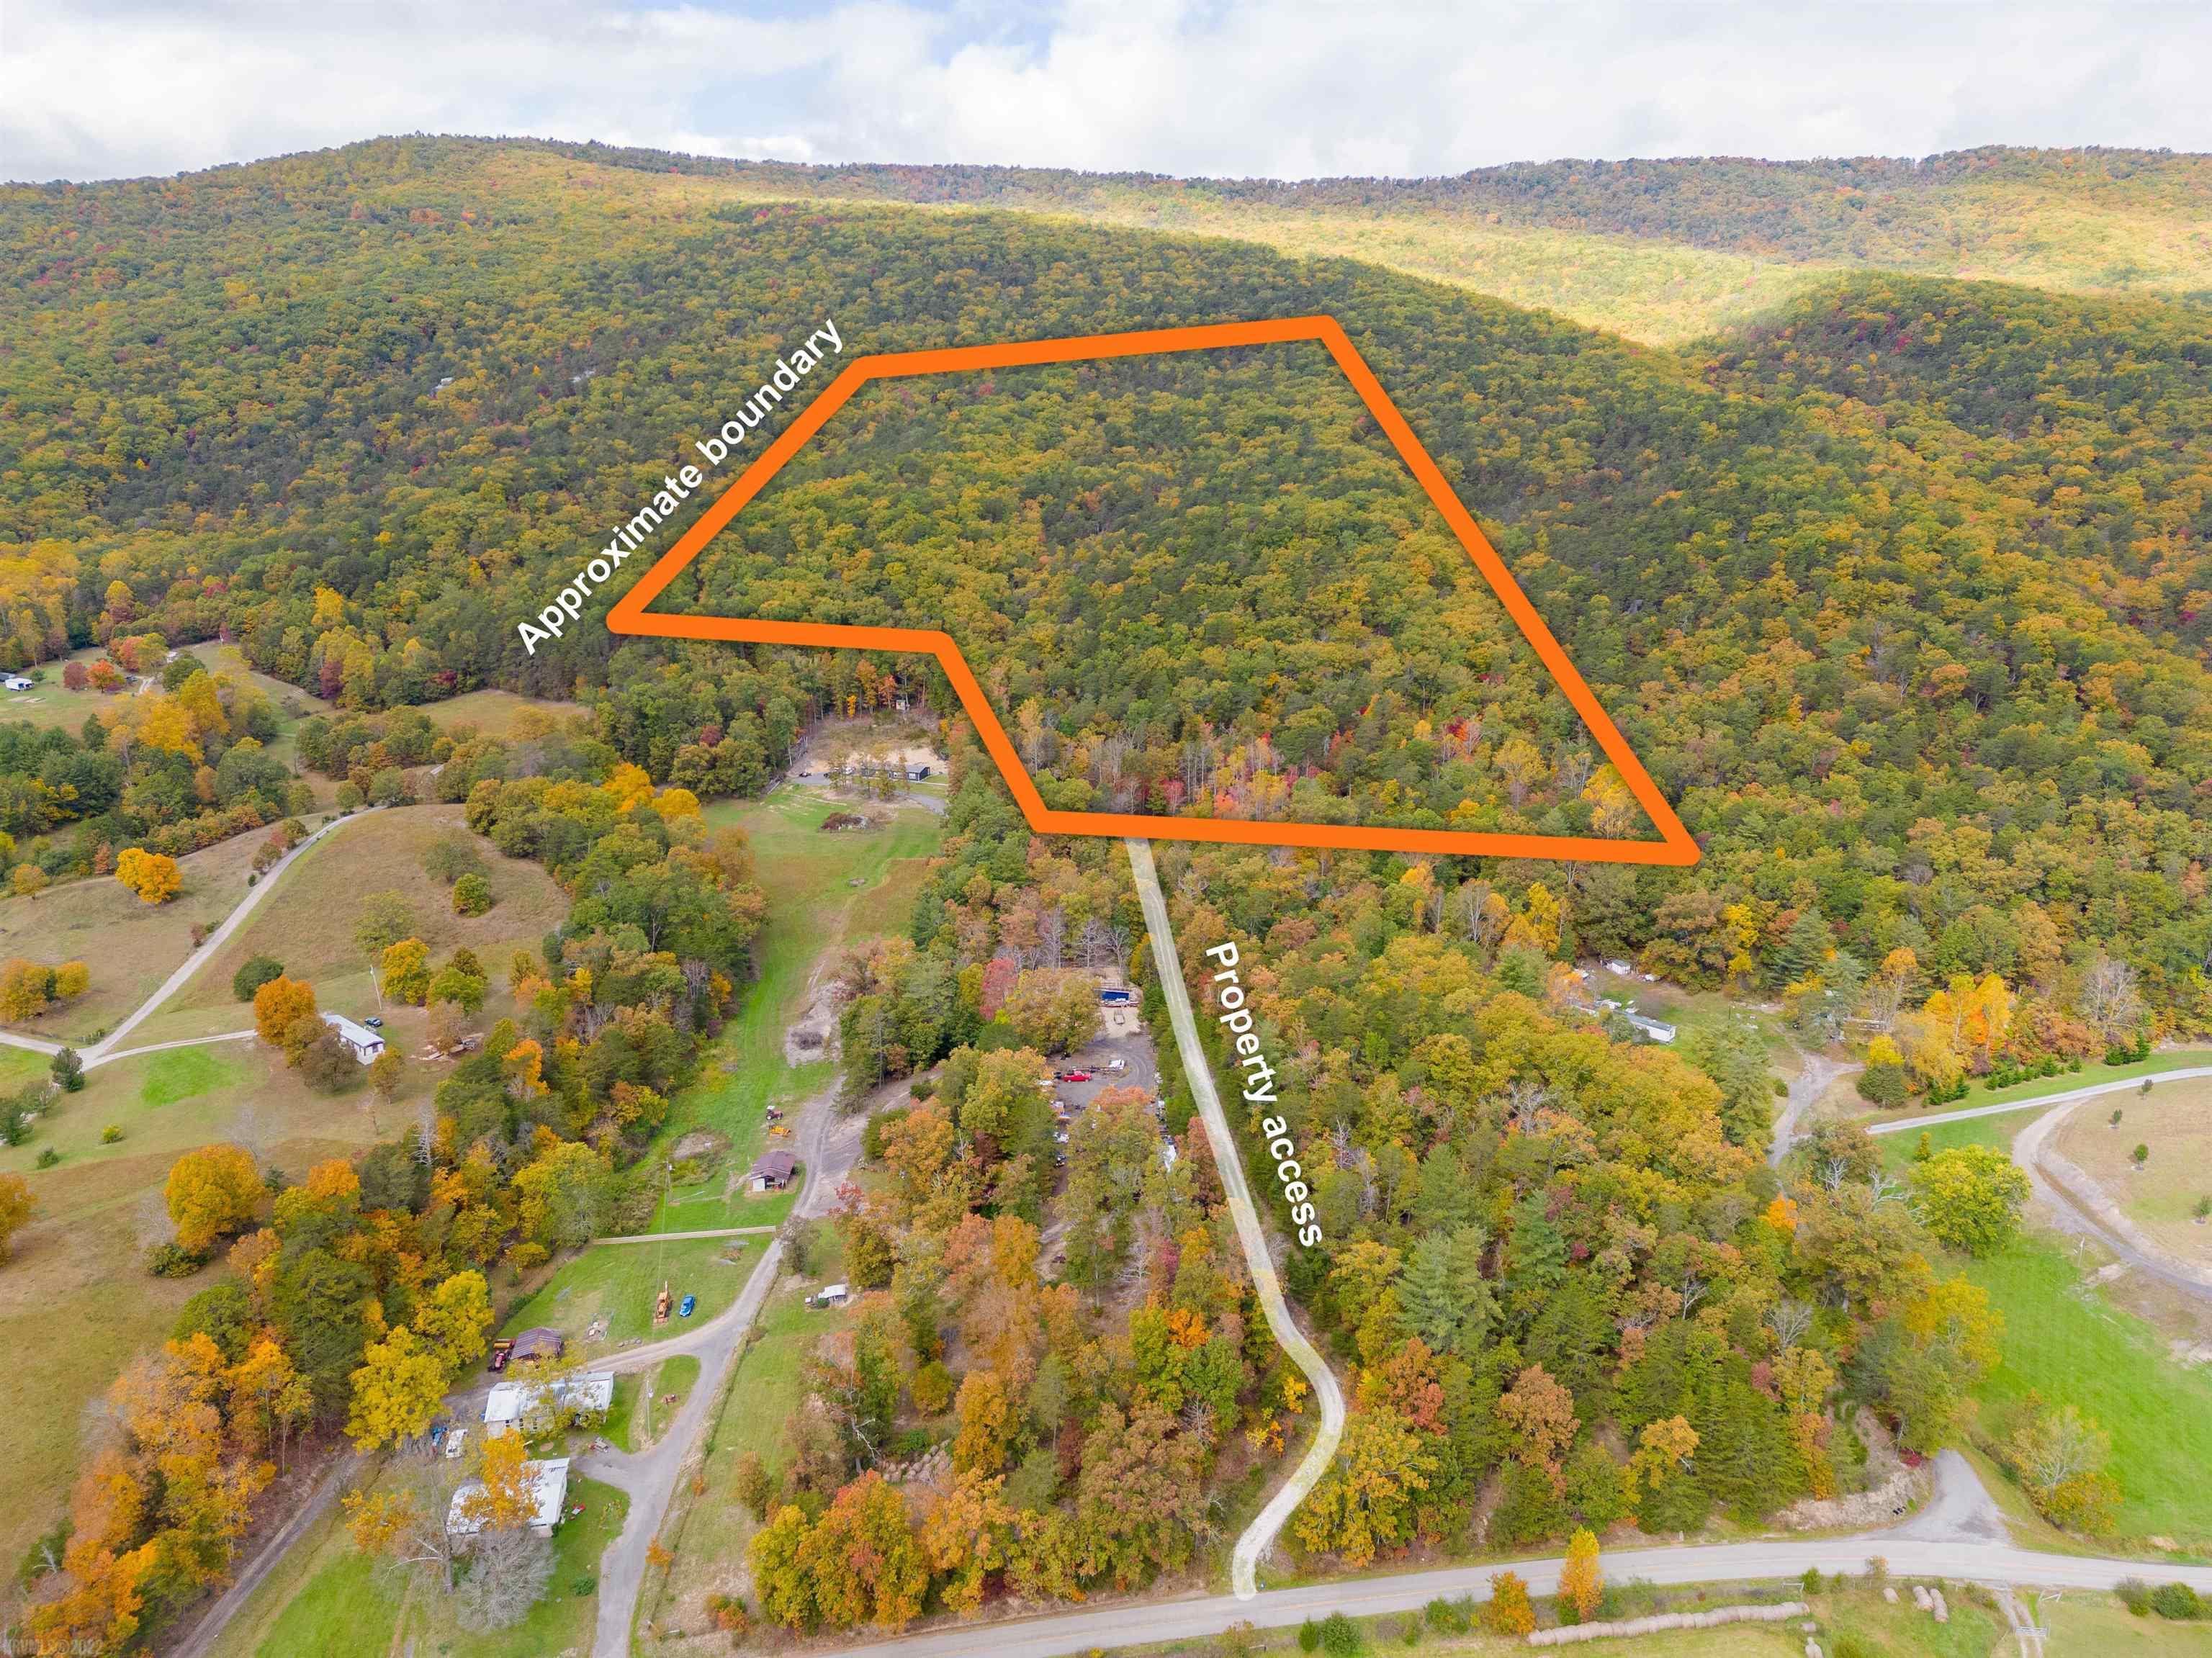 This property has quick access to I-81 and lots of privacy with incredible views and lots of wild blueberries!  There is already a deeded right-of-way into the property with soils test already performed.  Perfect spot to build at the base of the hill and a good camping area towards the top of the hill with unique rock outcroppings.